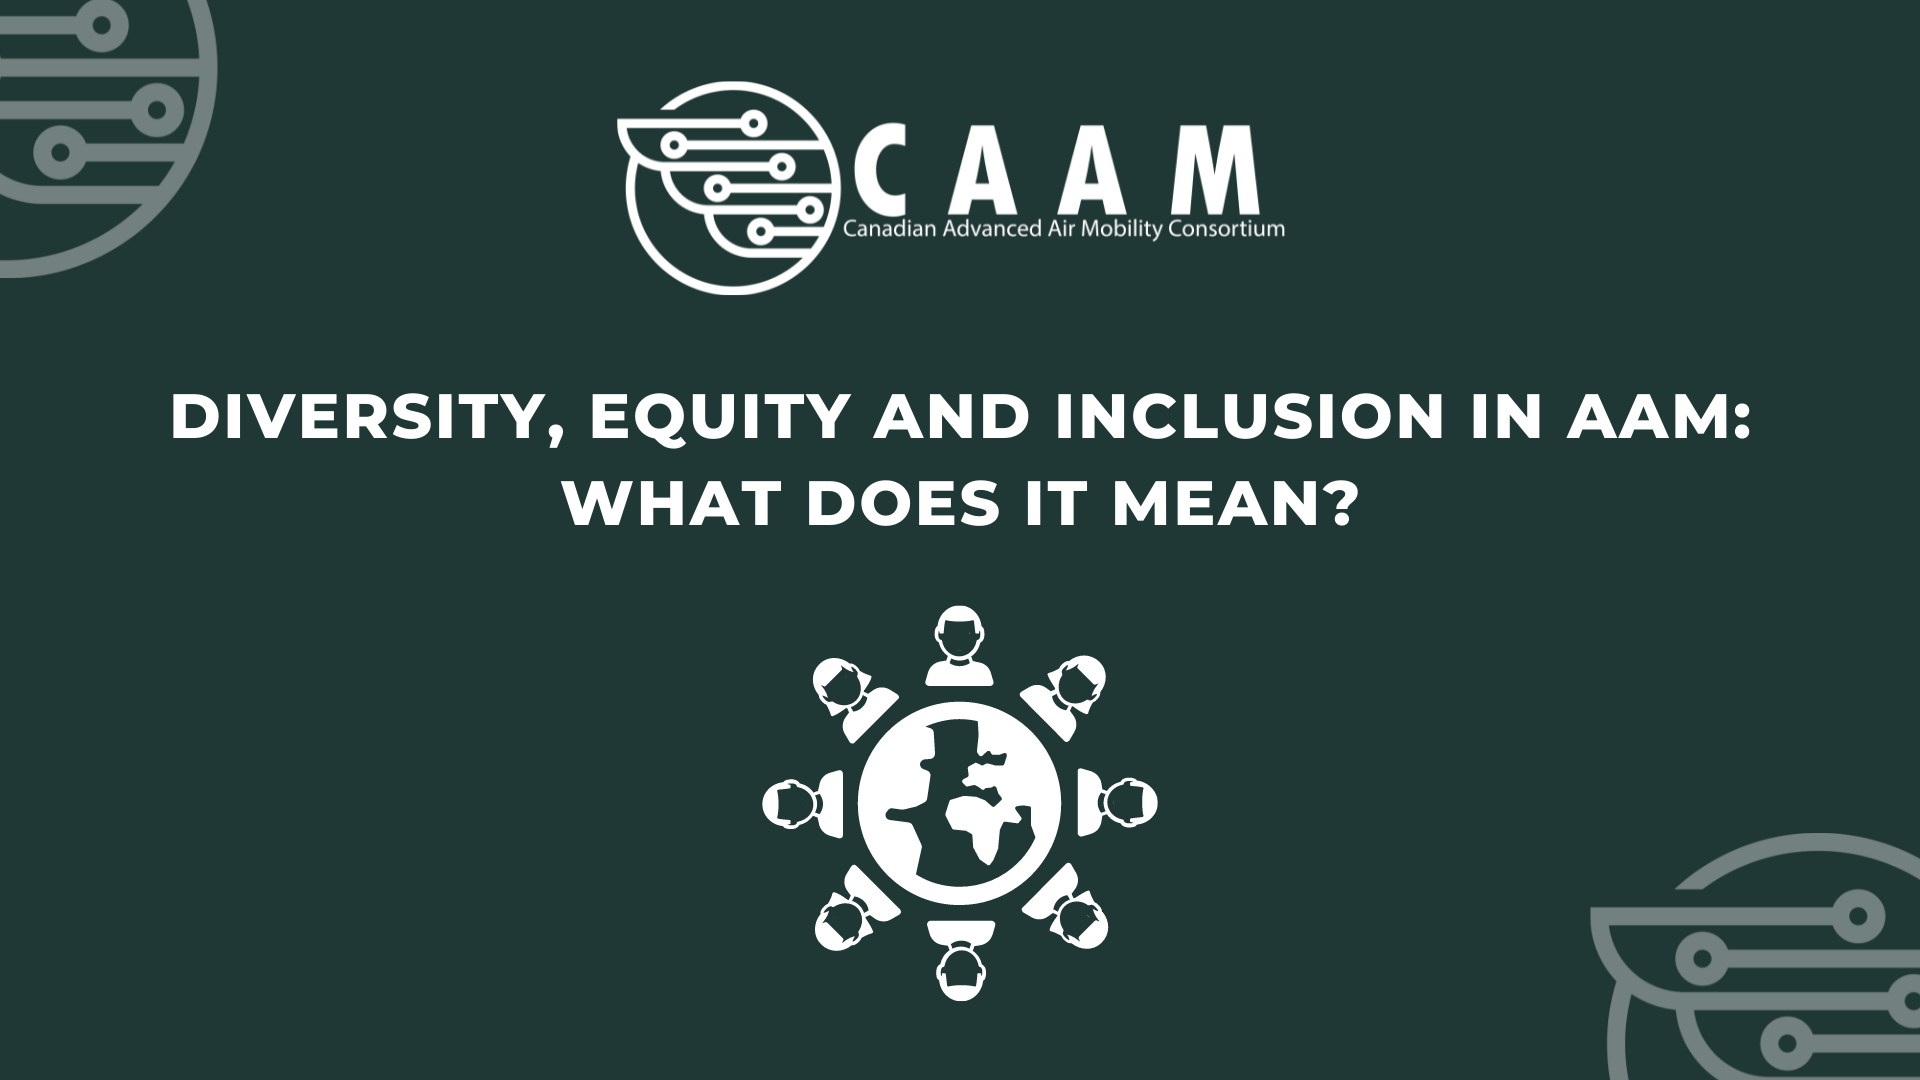 Diversity, Equity and Inclusion - What does it mean?